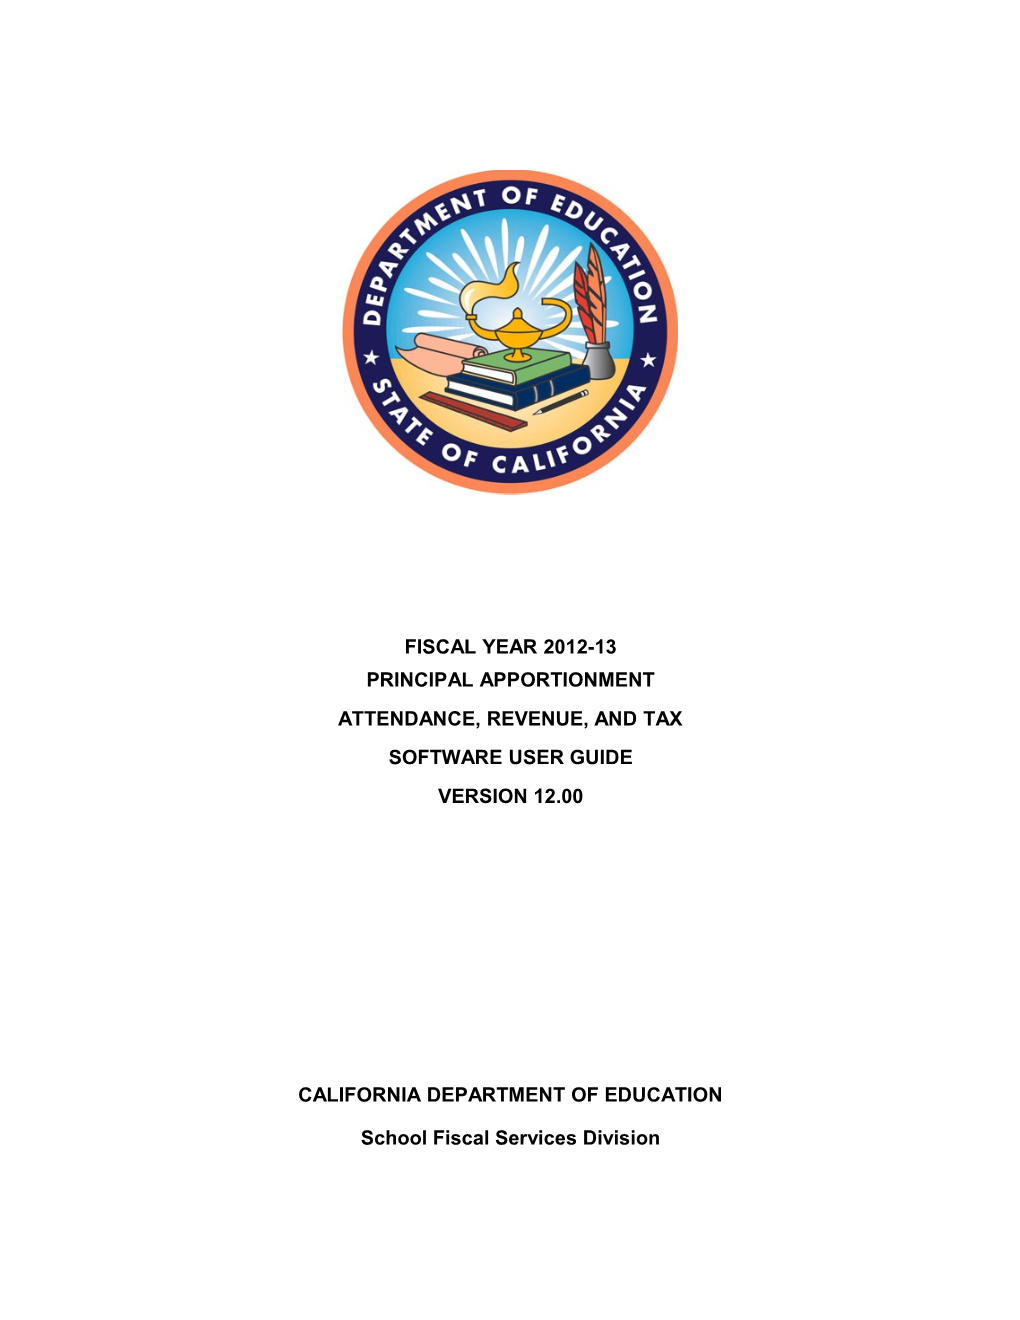 PA Software User Guide, FY 2012-13 - Principal Apportionment (CA Dept of Education)